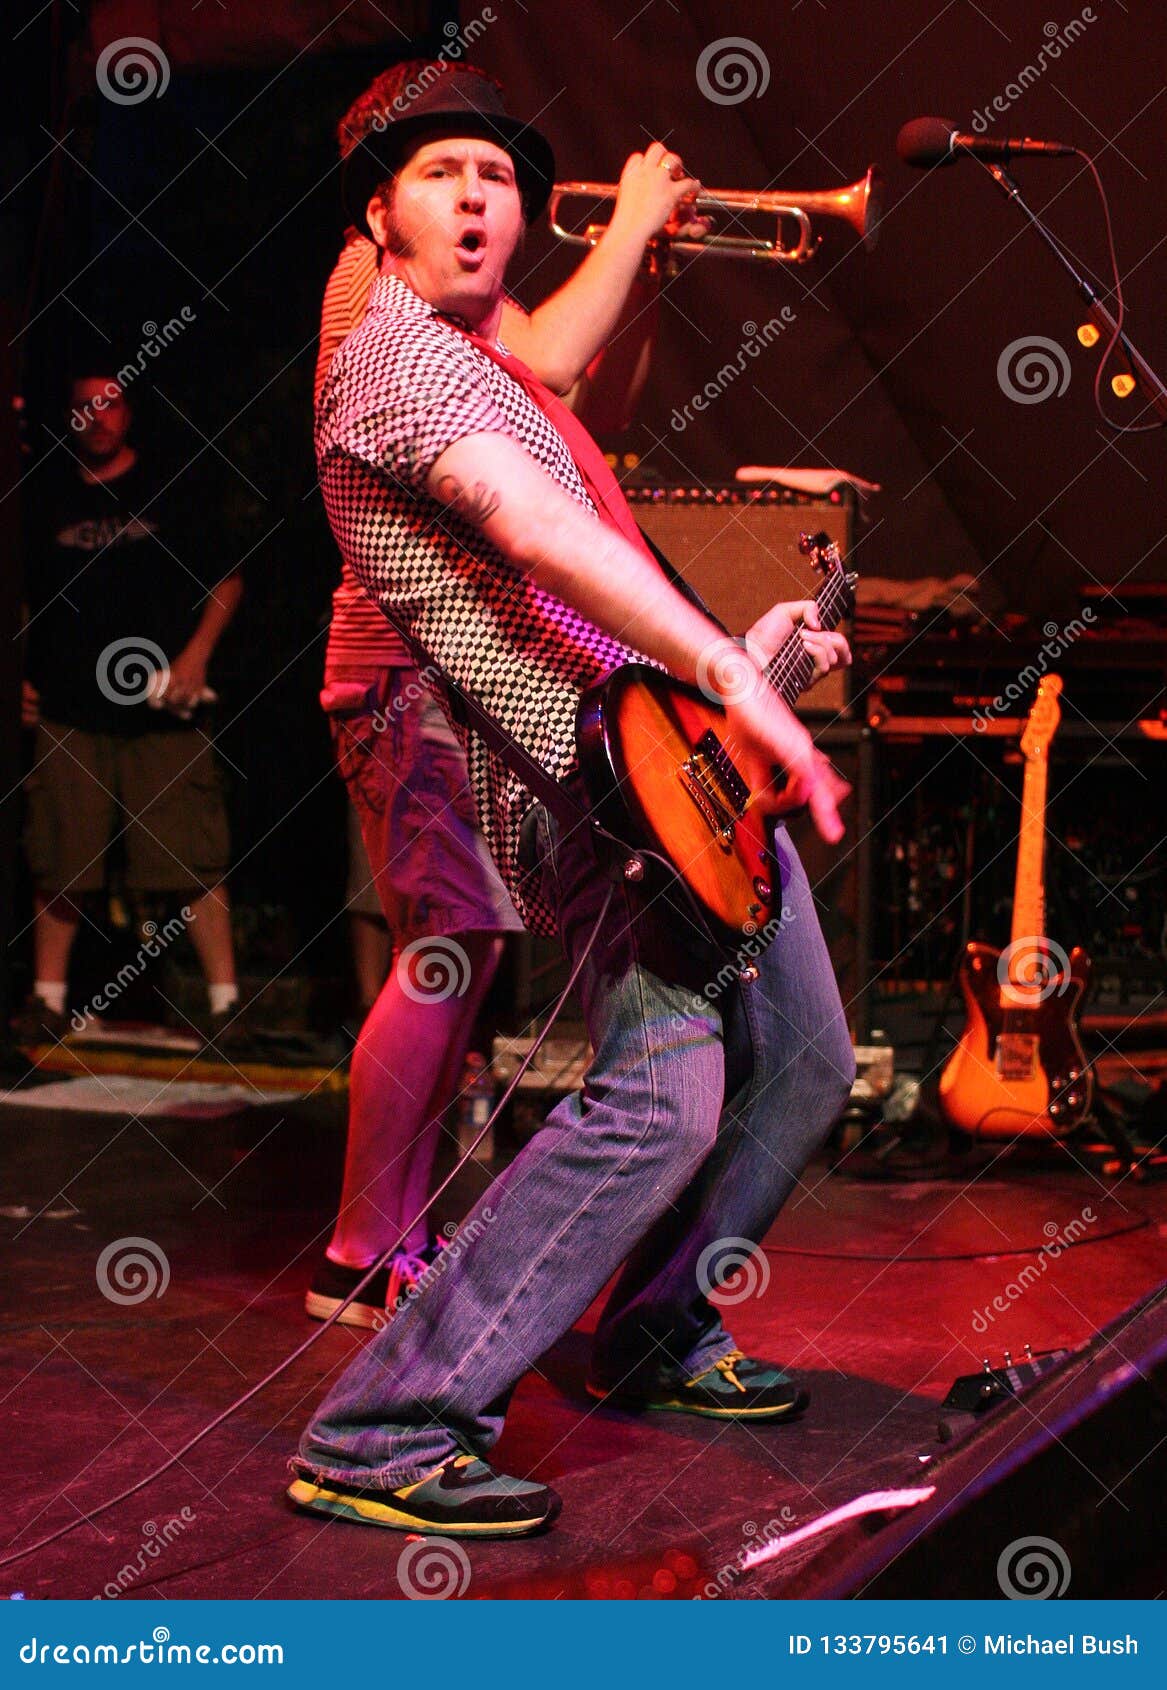 Reel Big Fish Perform in Concert Editorial Photo - Image of